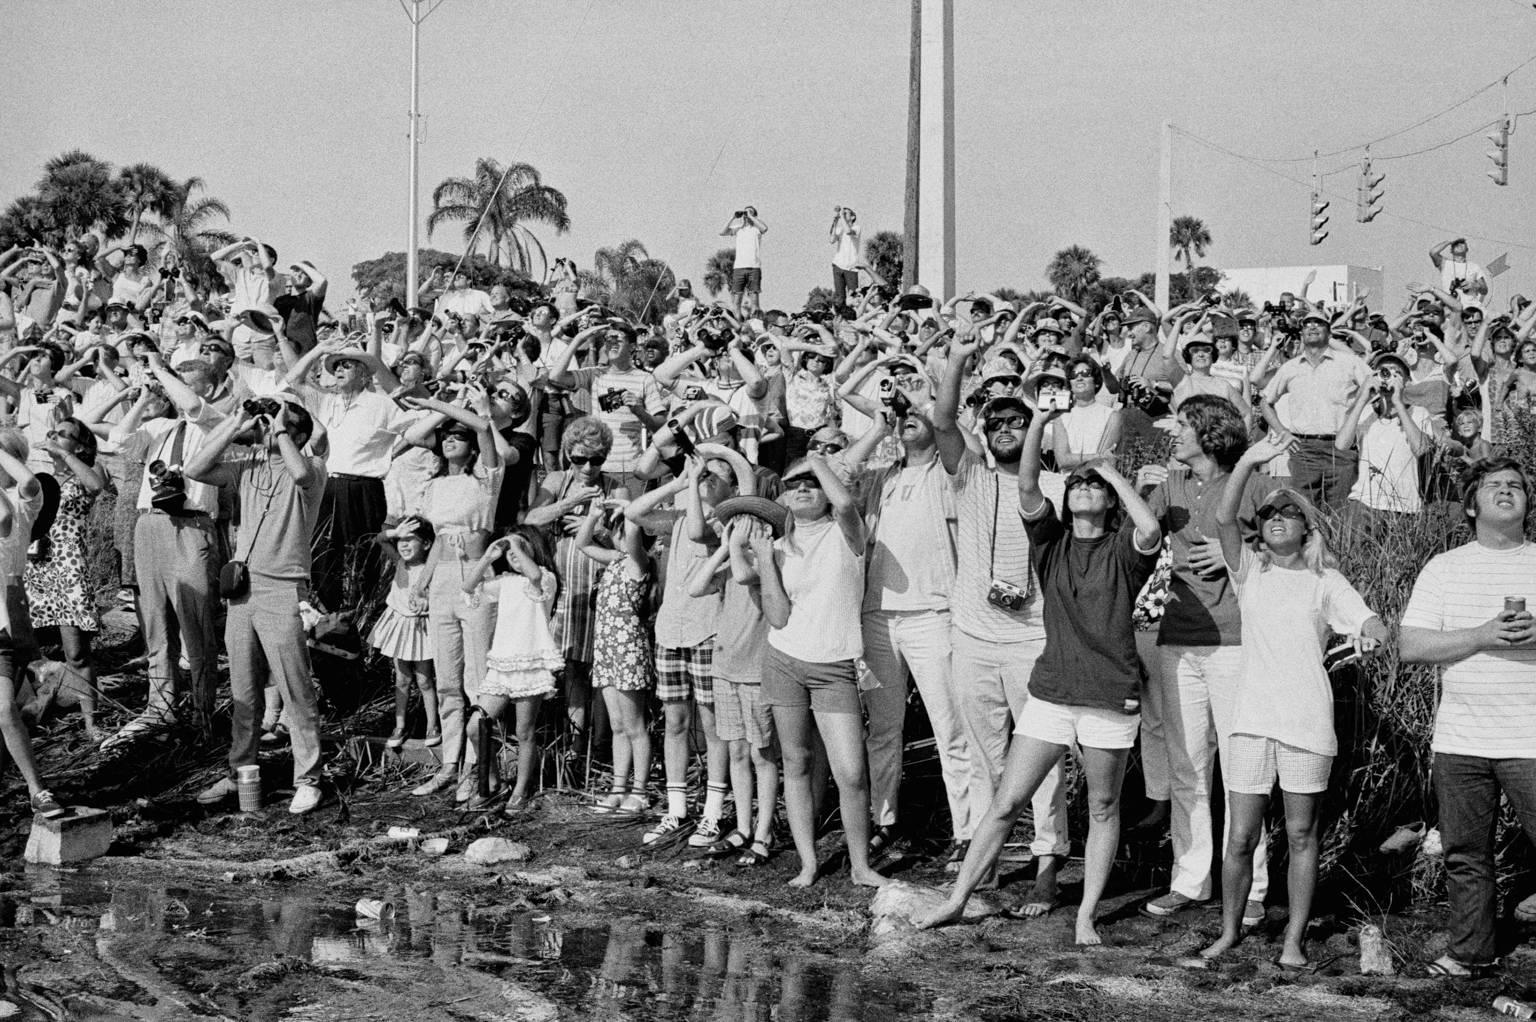 Jean-Pierre Laffont Black and White Photograph - Apollo XI Launch Crowd watching and taking photos Cape Kennedy, FL. July 16th, 1